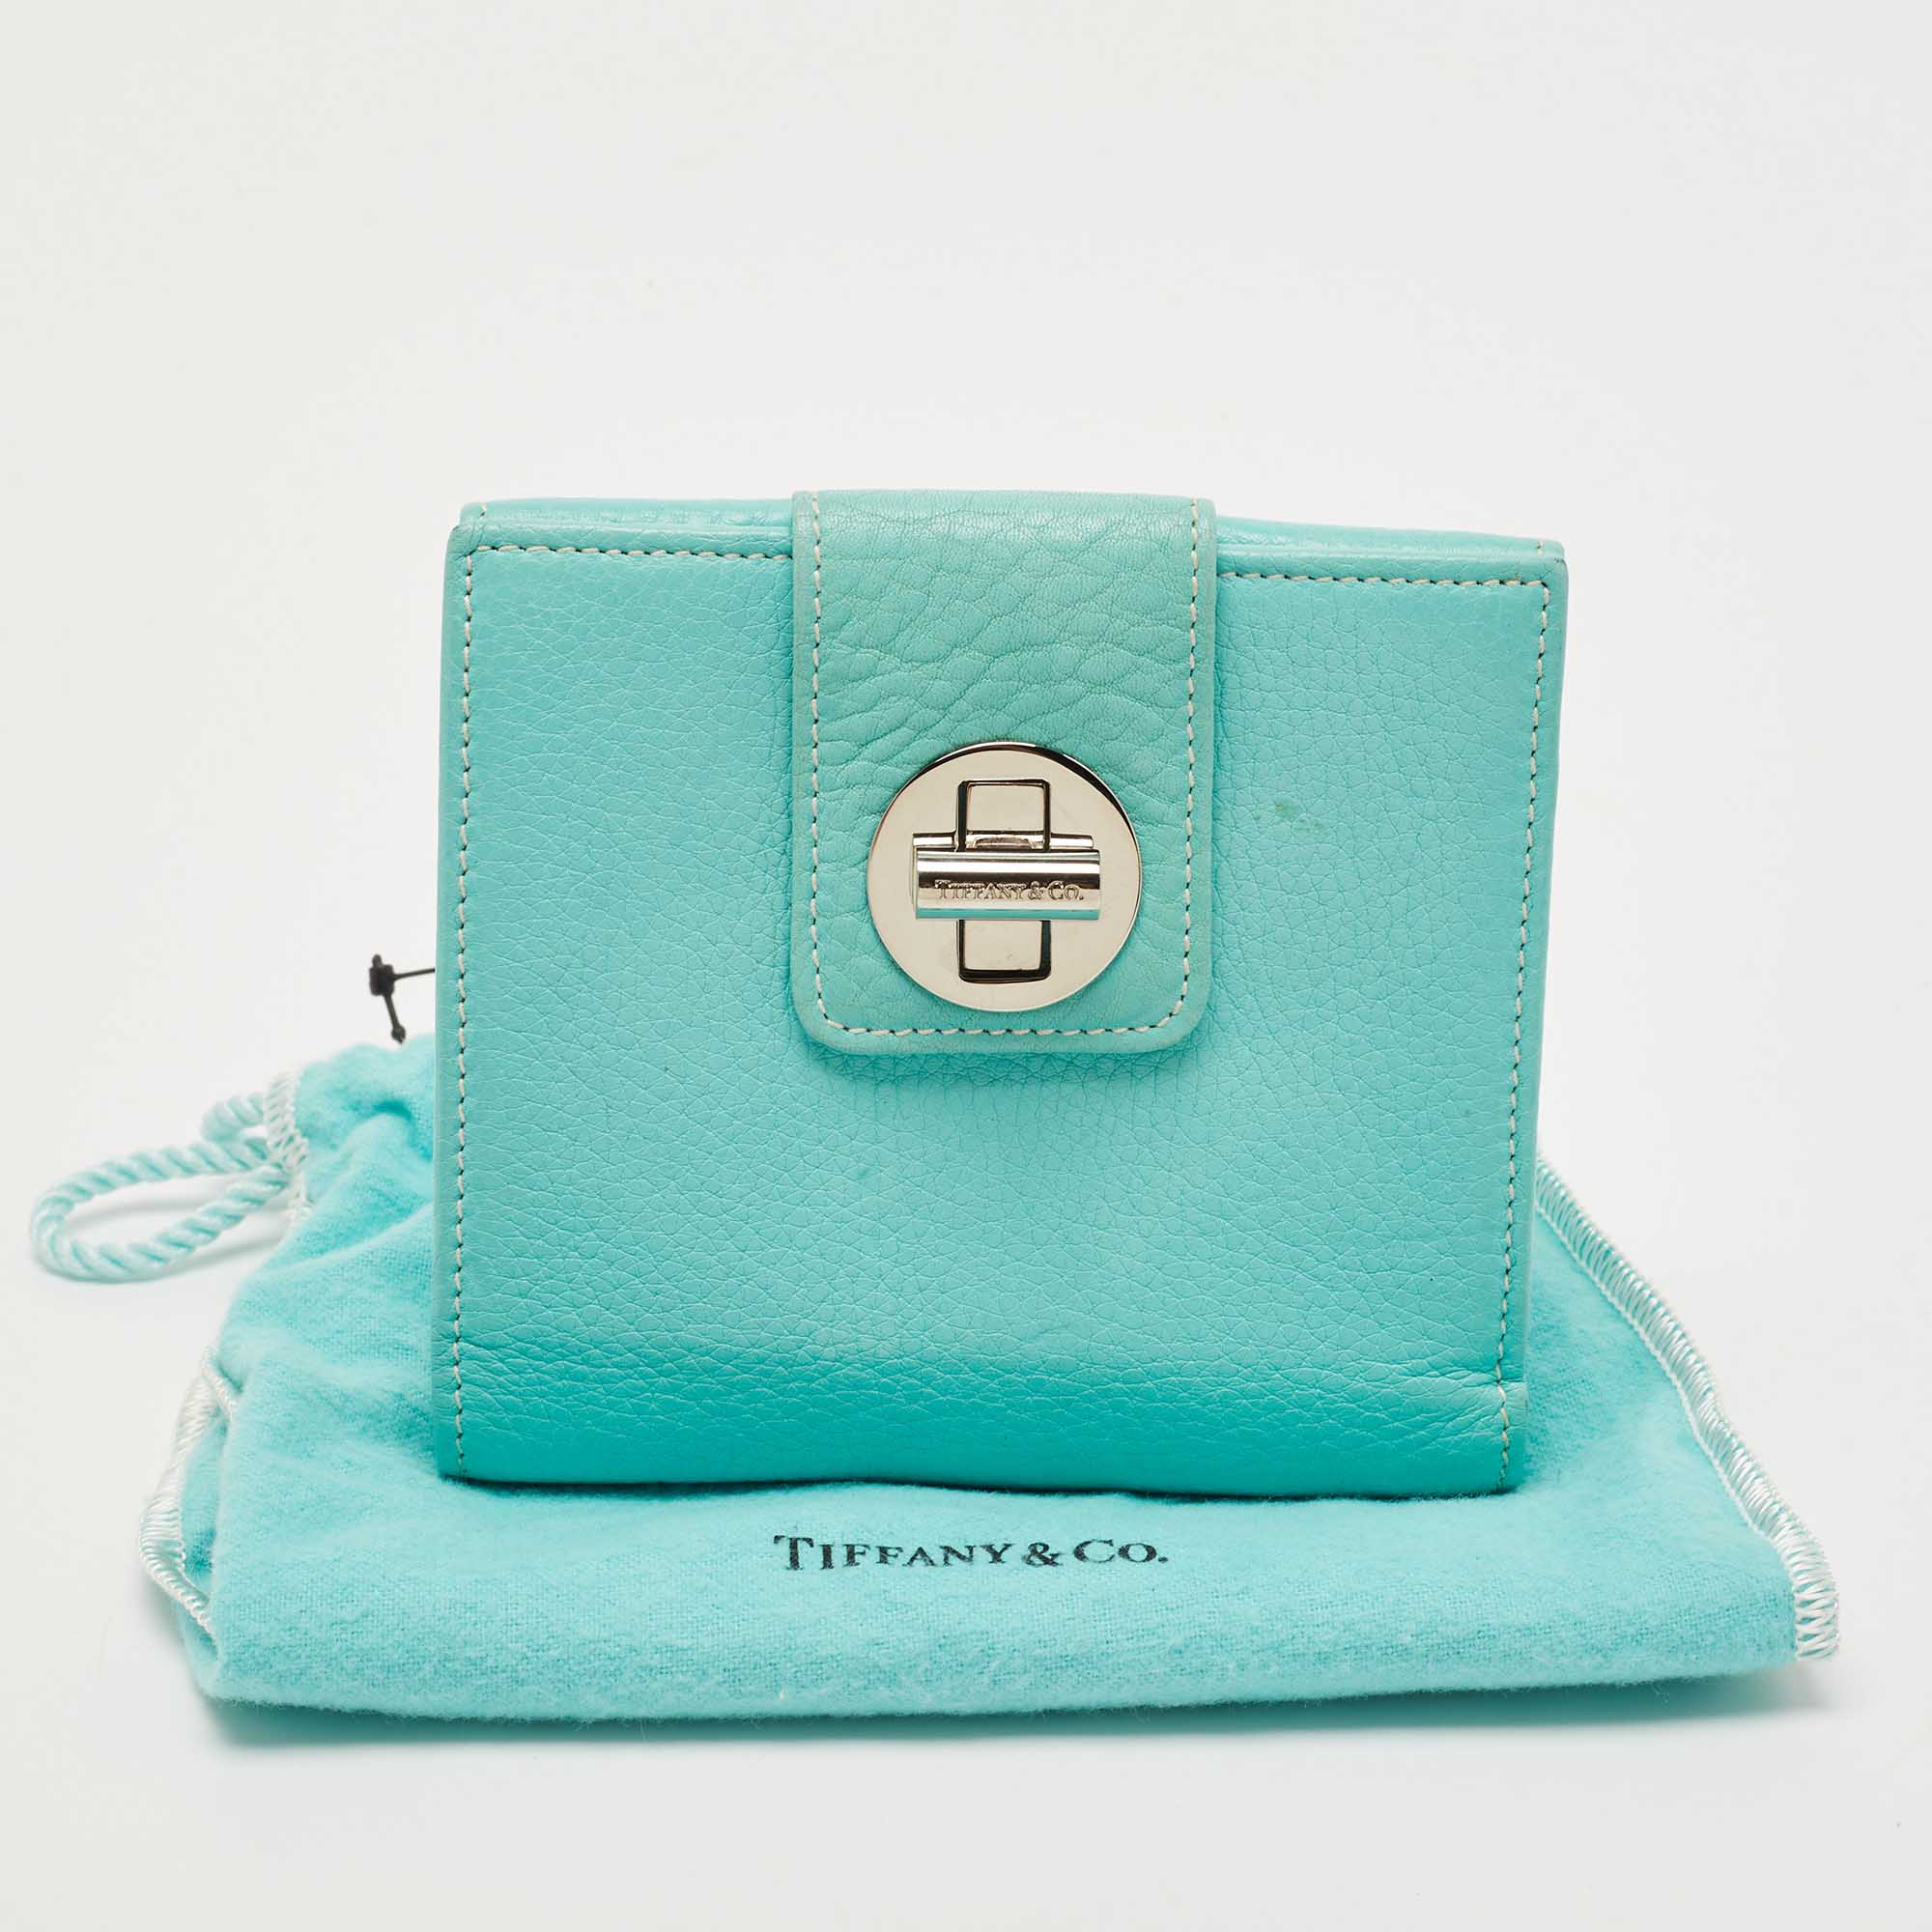 Tiffany & Co.Turquoise Leather Turnlock French Wallet